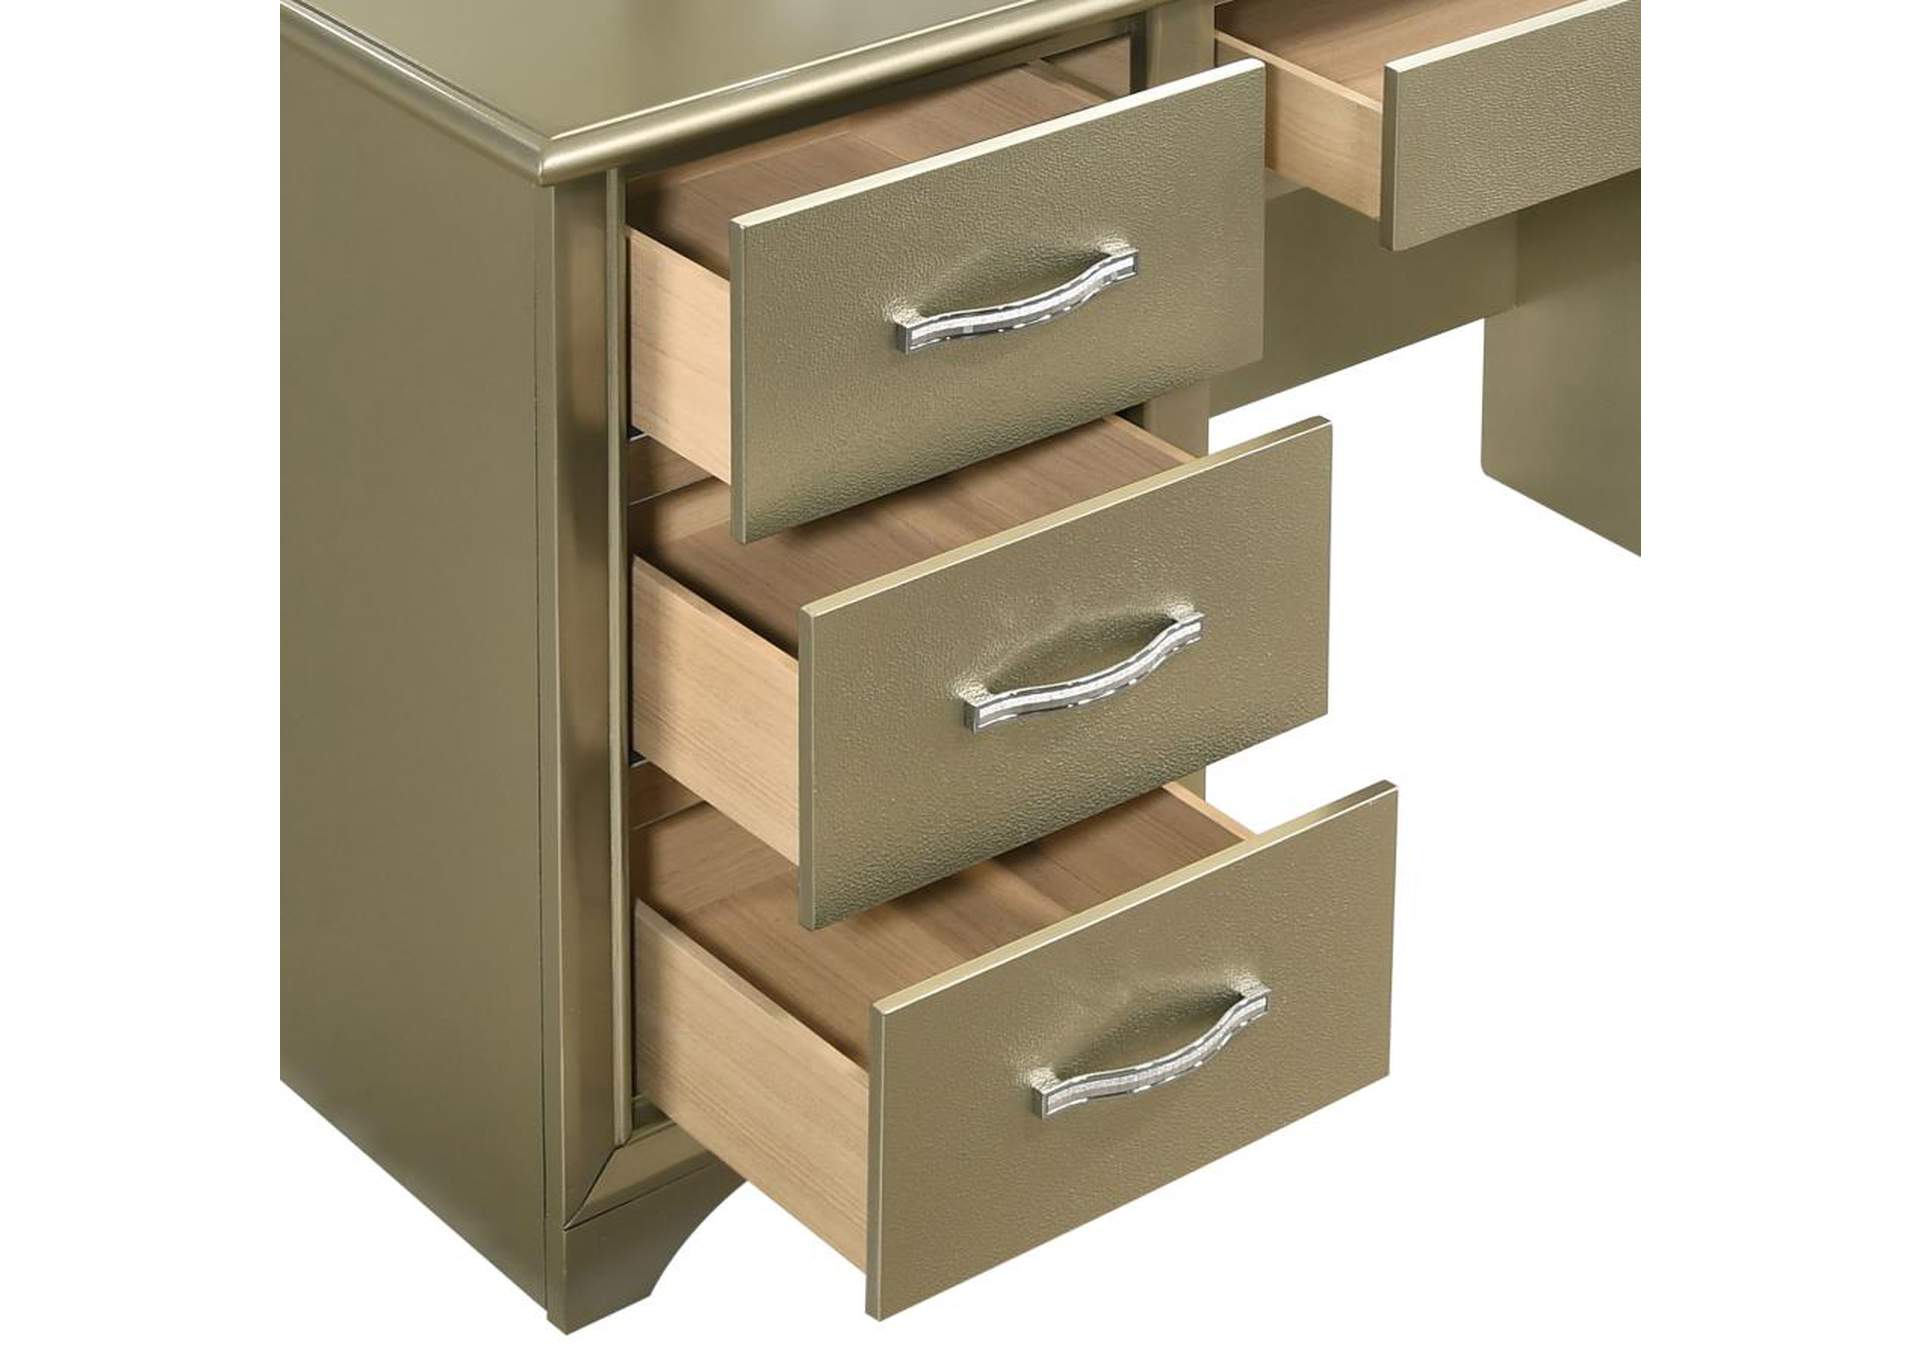 Beaumont 7 - drawer Vanity Desk with Lighting Mirror Champagne,Coaster Furniture